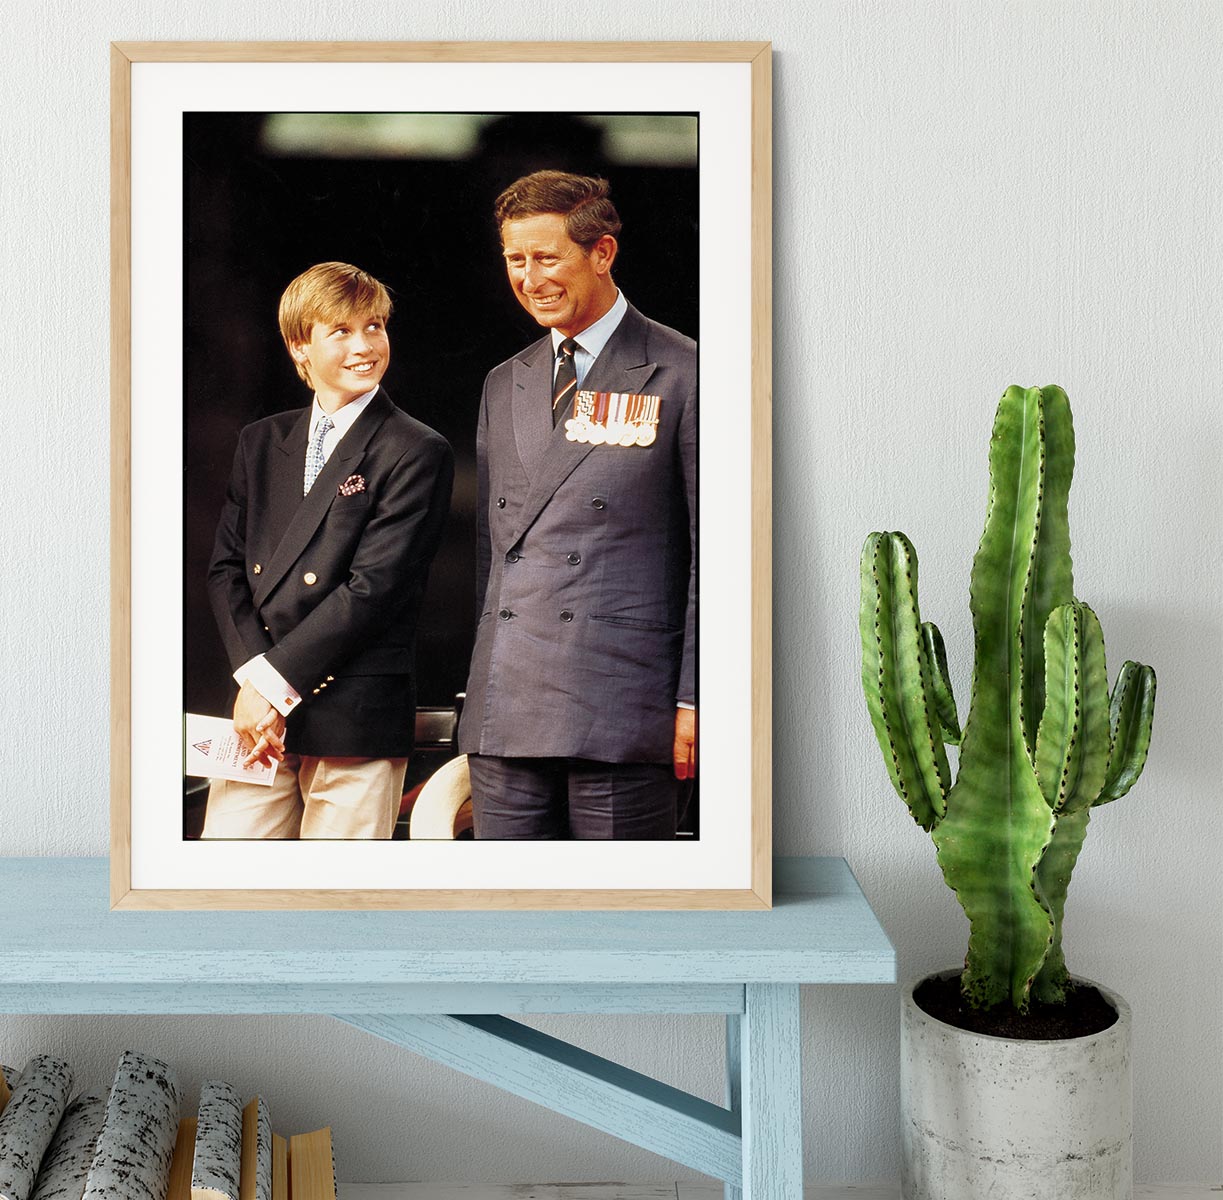 Prince William with Prince Charles at a VJ Parade Framed Print - Canvas Art Rocks - 3